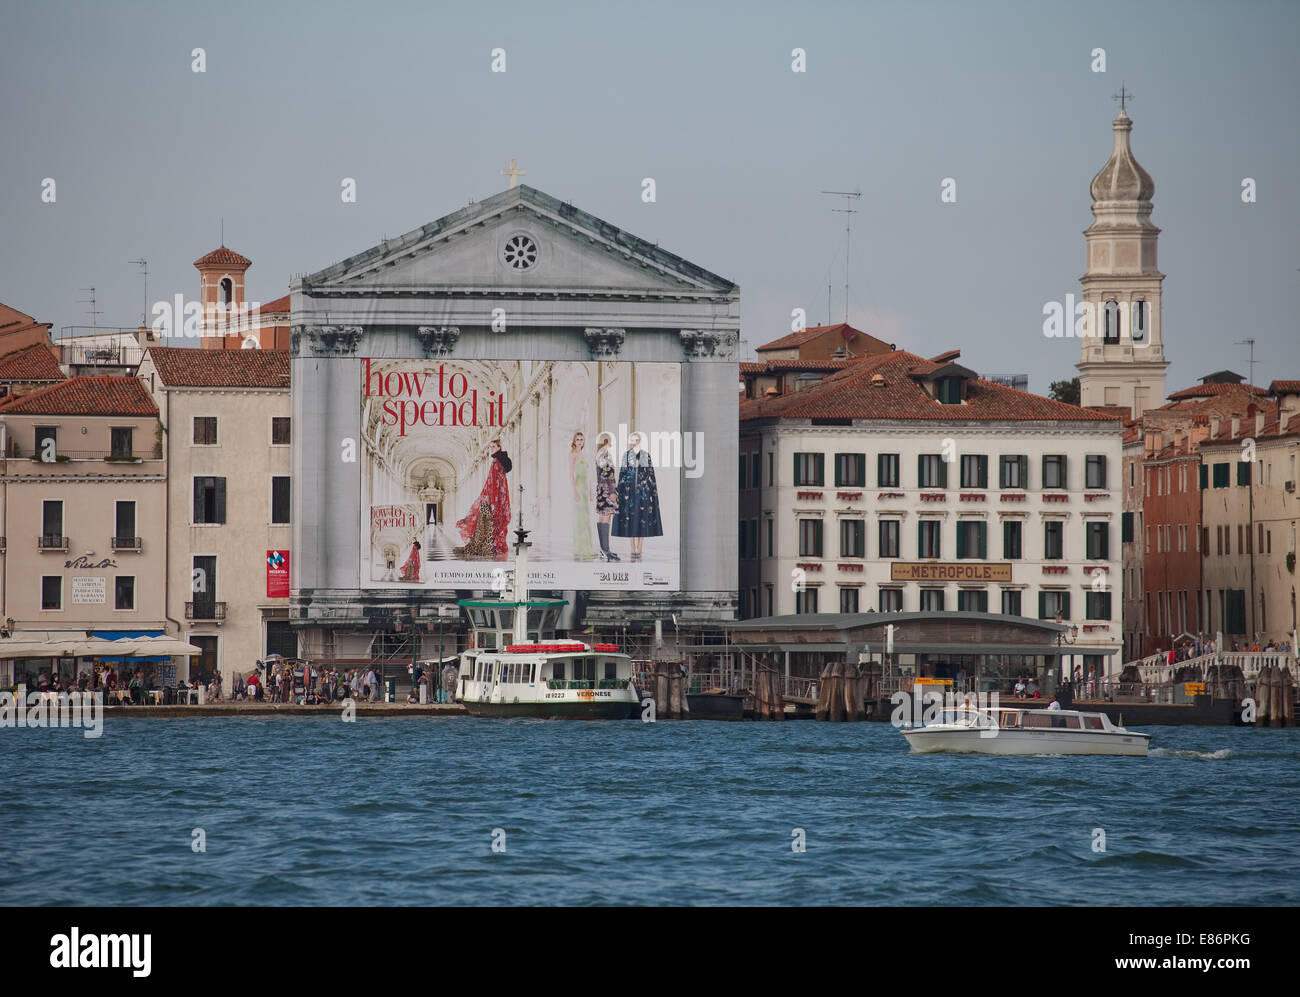 Grand canal as seen from the island of San Giorgio Maggiore classic Venice water buses, water Taxis,, palaces,and bell towers,an Stock Photo